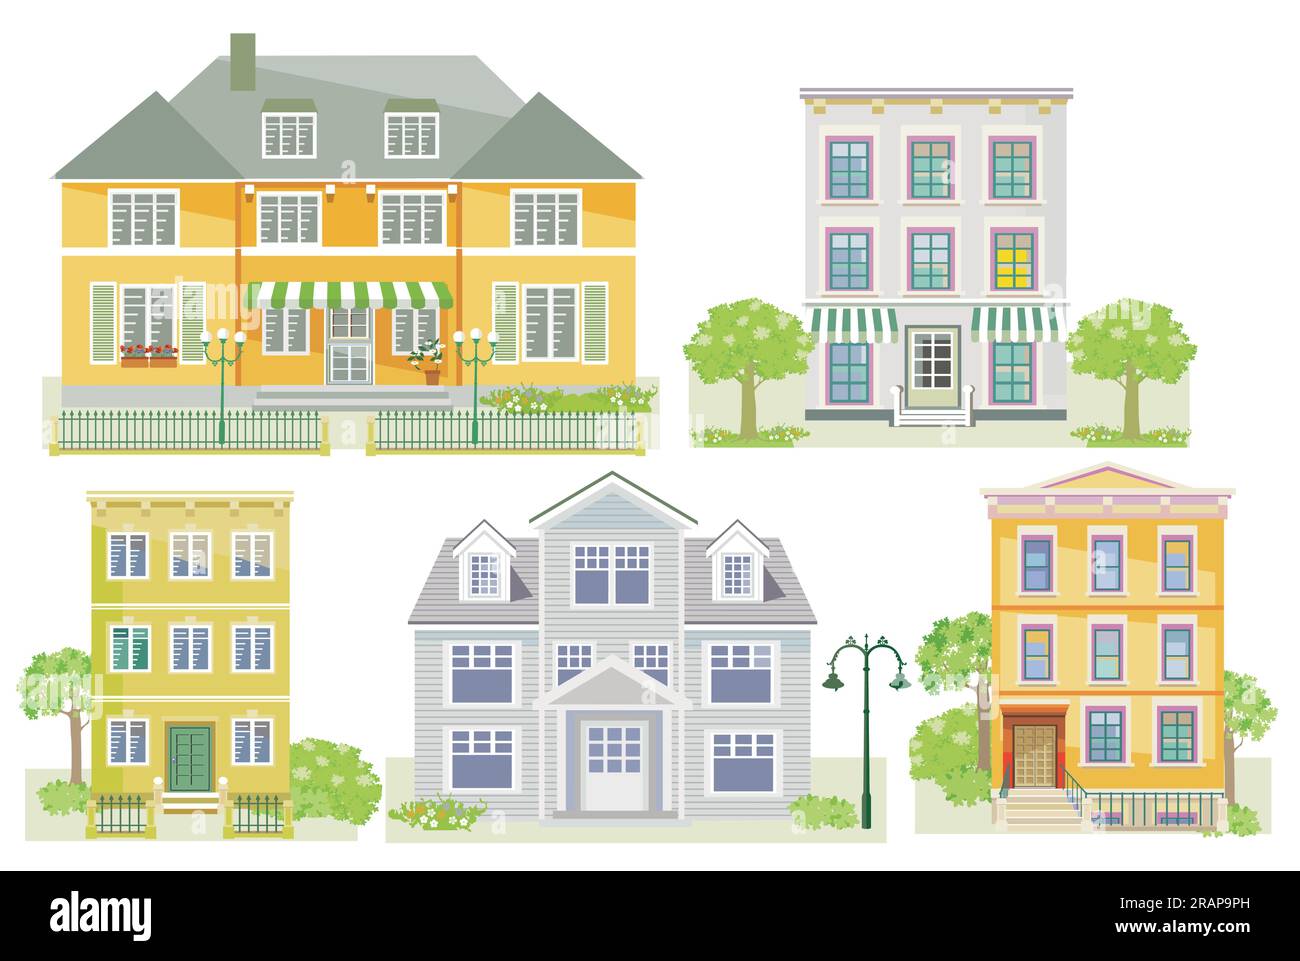 Set of houses and apartment buildings, country houses, wooden houses, family houses, isolated on white background. illustration Stock Vector